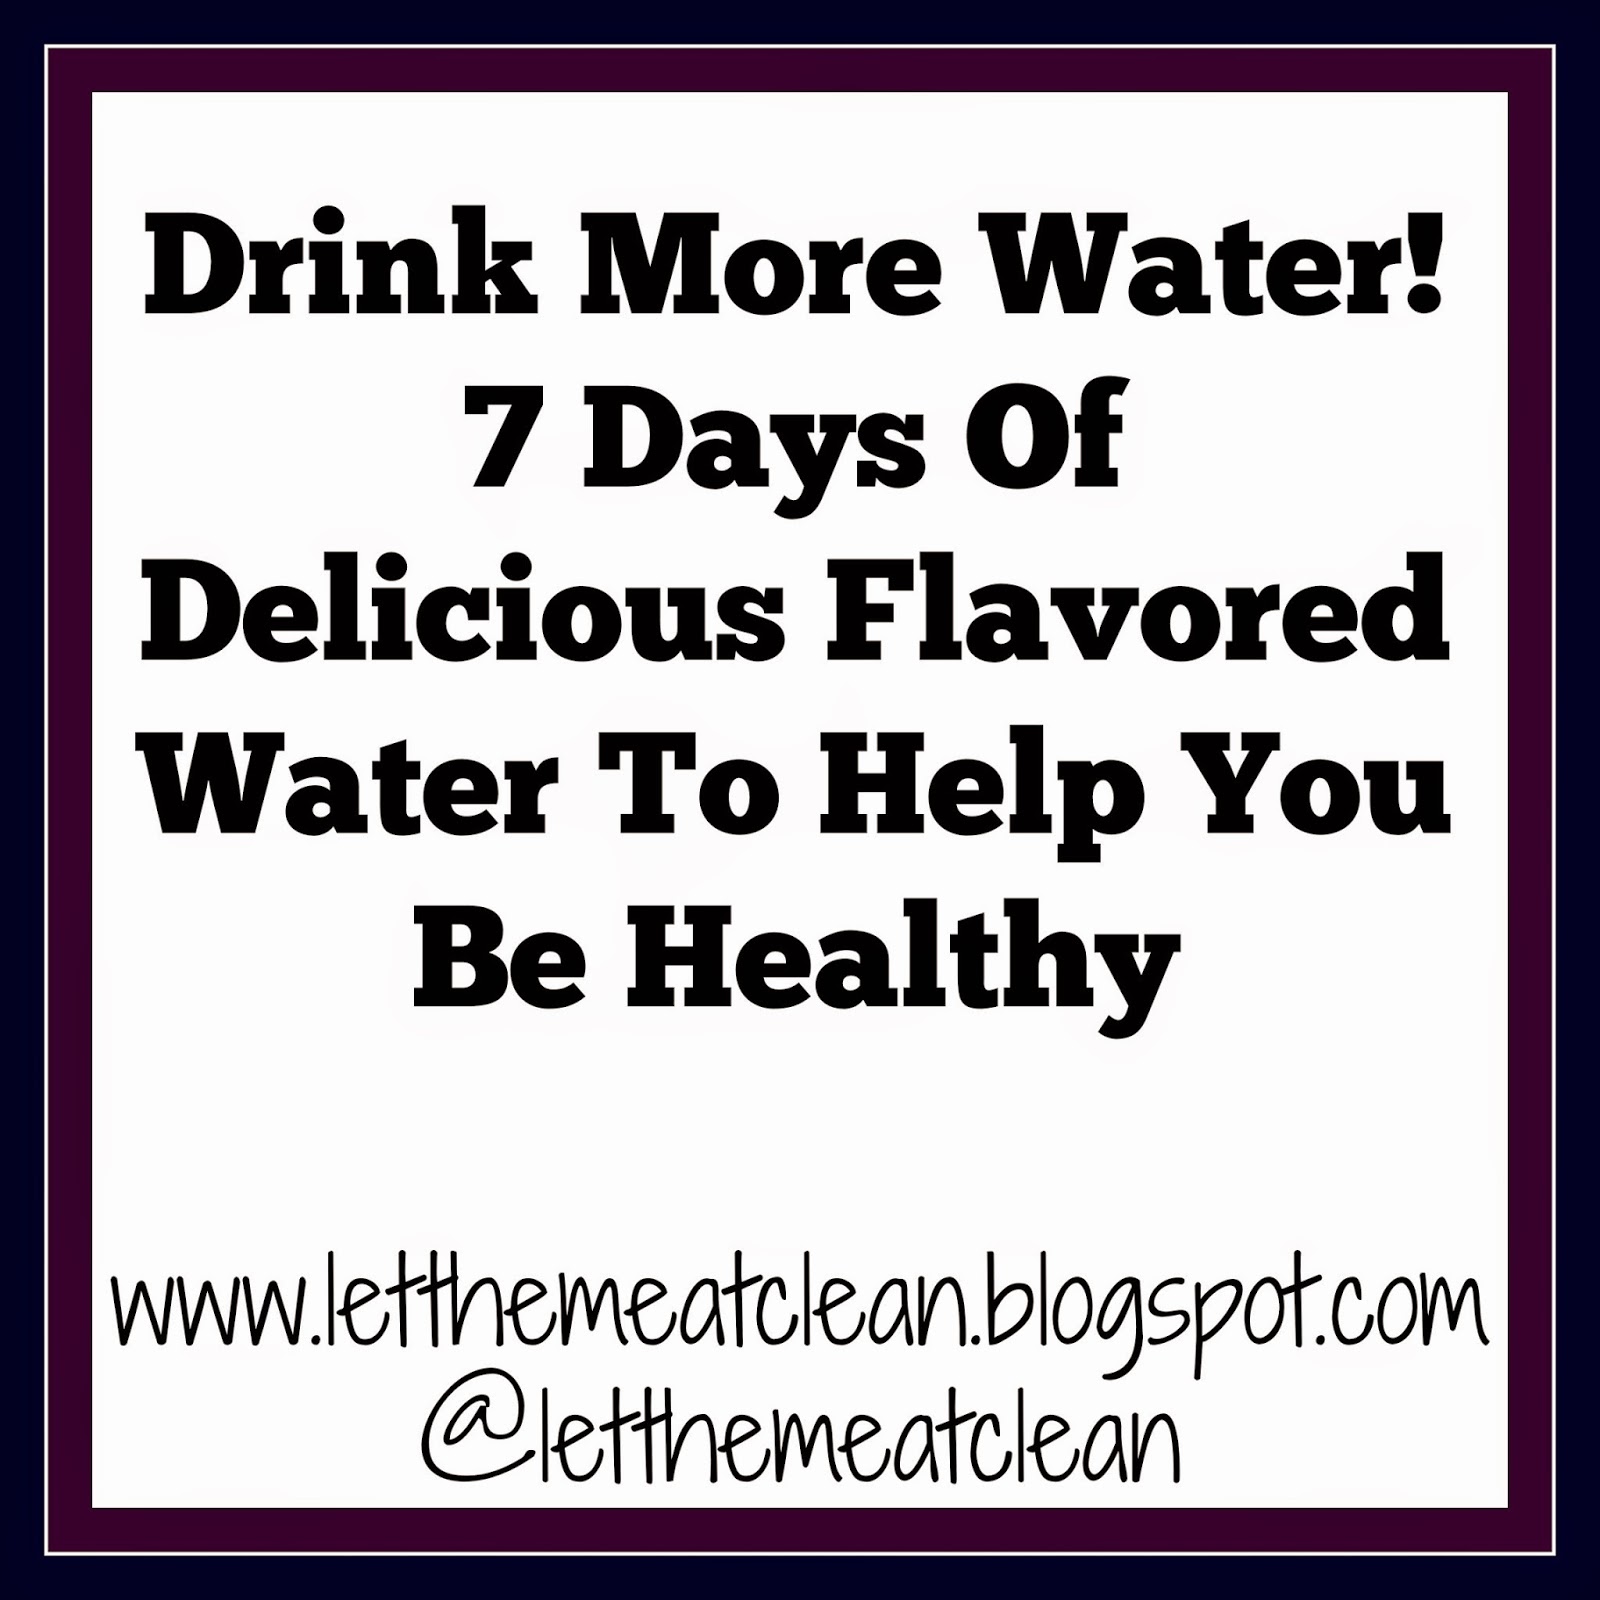 Let Them Eat Clean: 7 Days Of Flavored Water